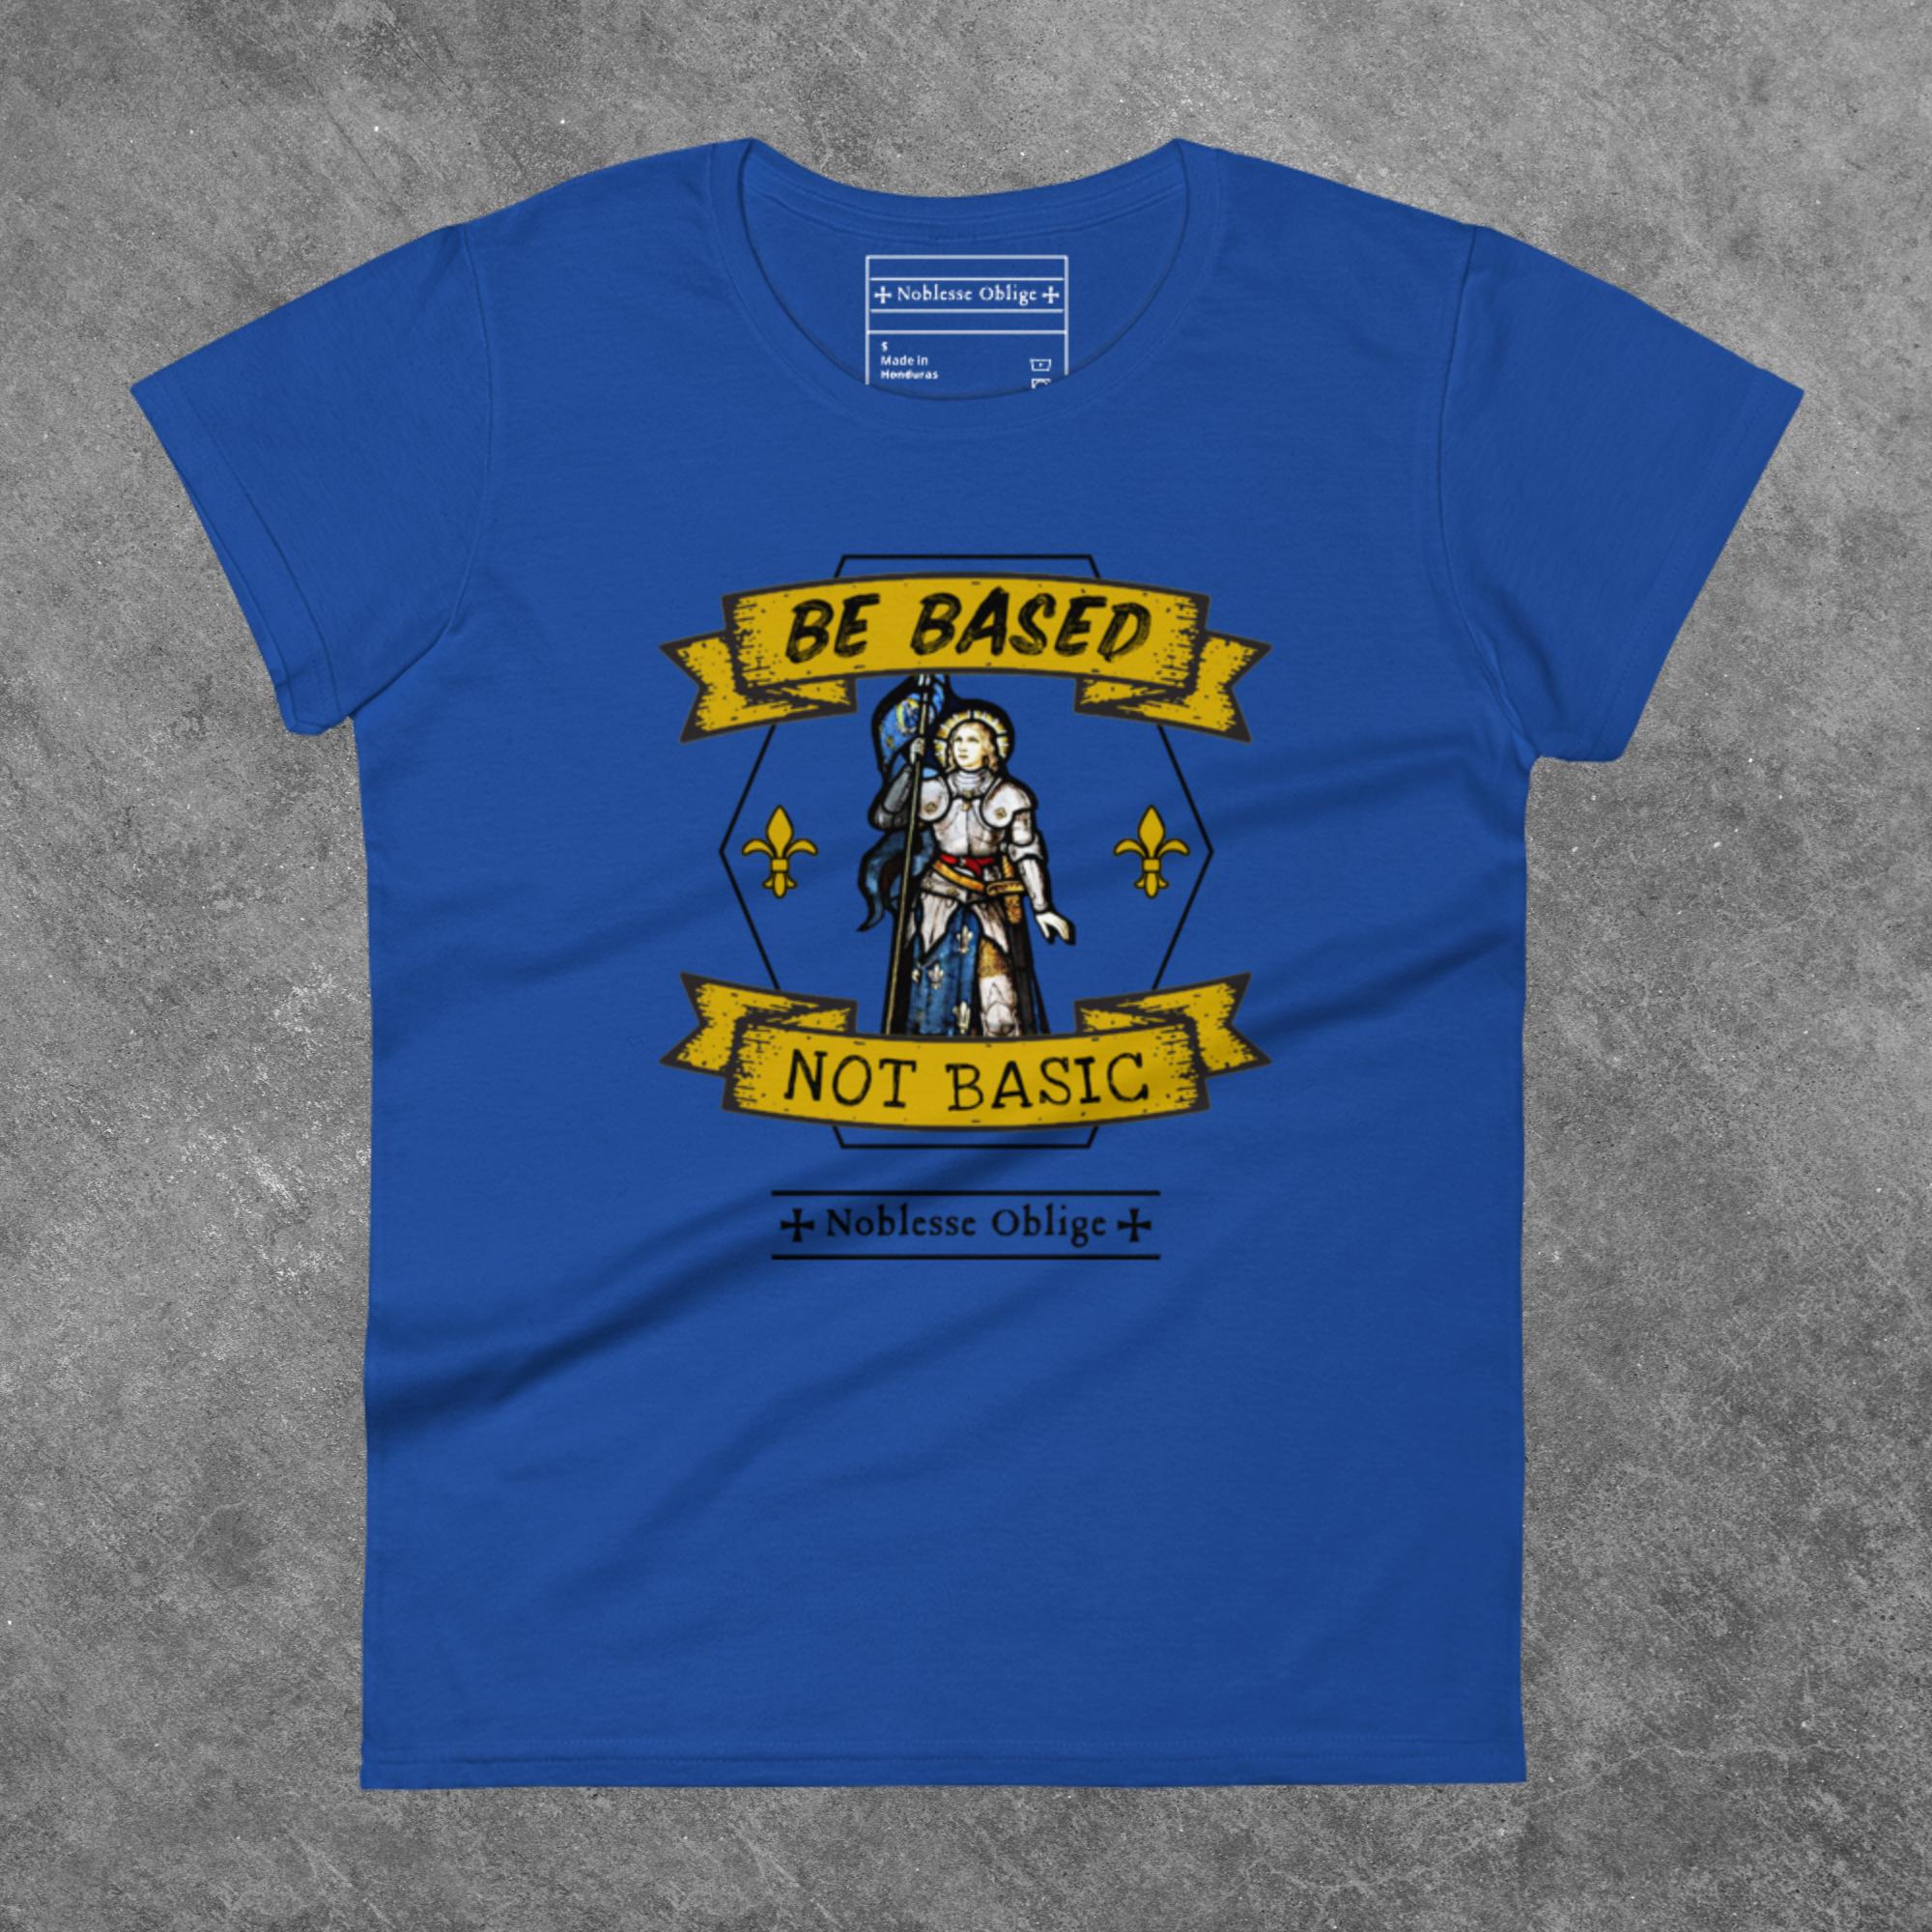 Be Based, Not Basic - Women's Fitted-shirt - Noblesse Oblige Apparel